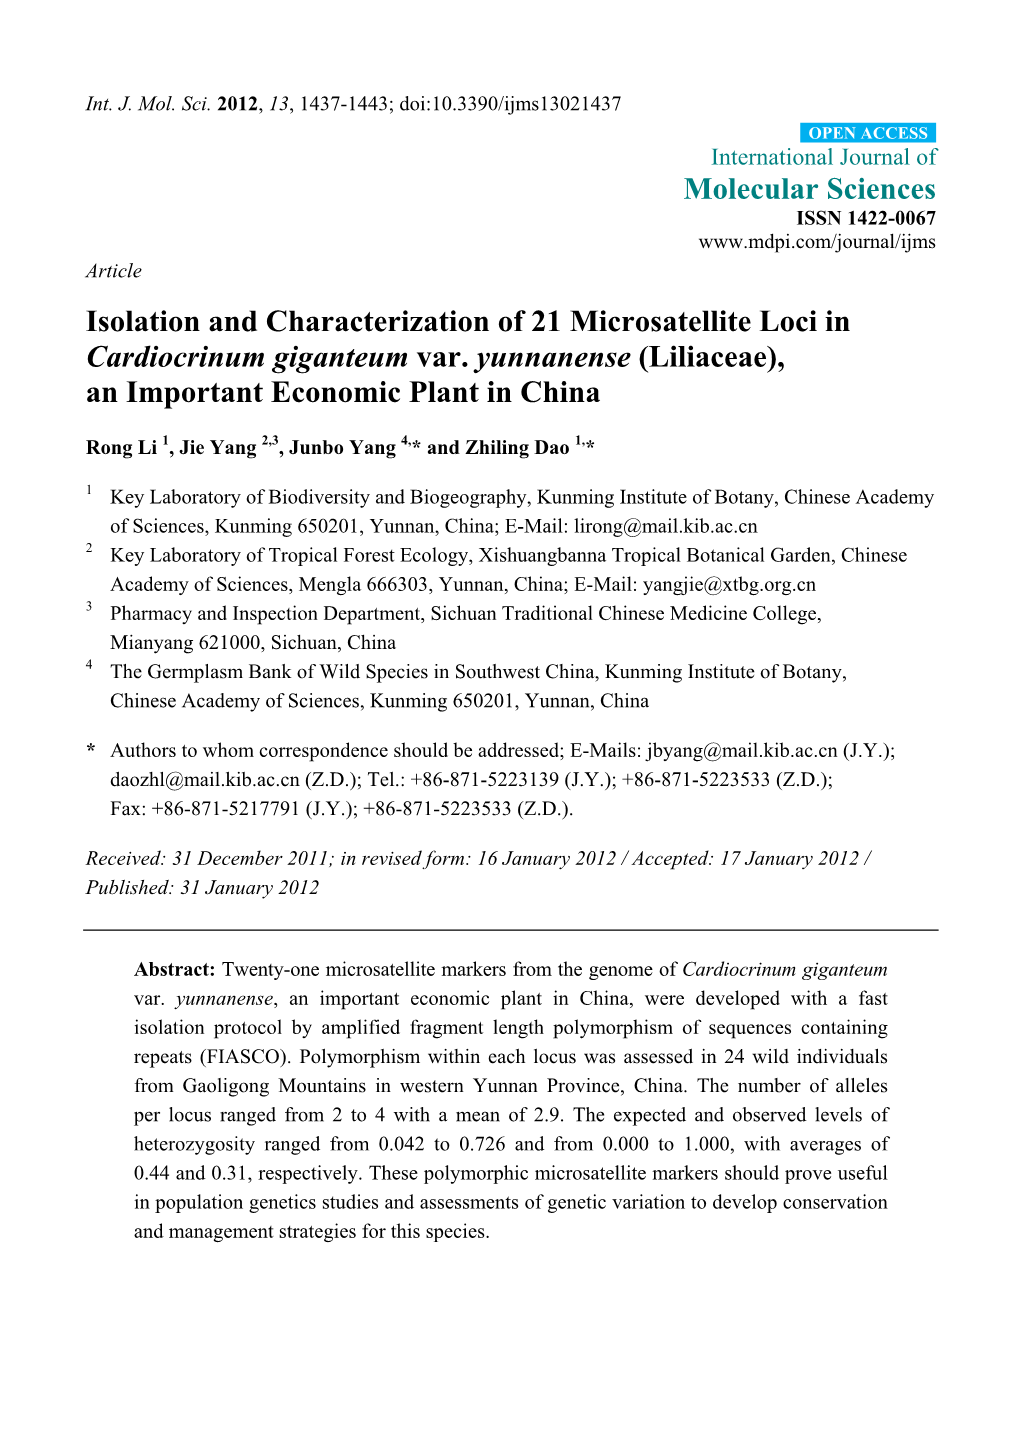 Isolation and Characterization of 21 Microsatellite Loci in Cardiocrinum Giganteum Var. Yunnanense (Liliaceae), an Important Economic Plant in China